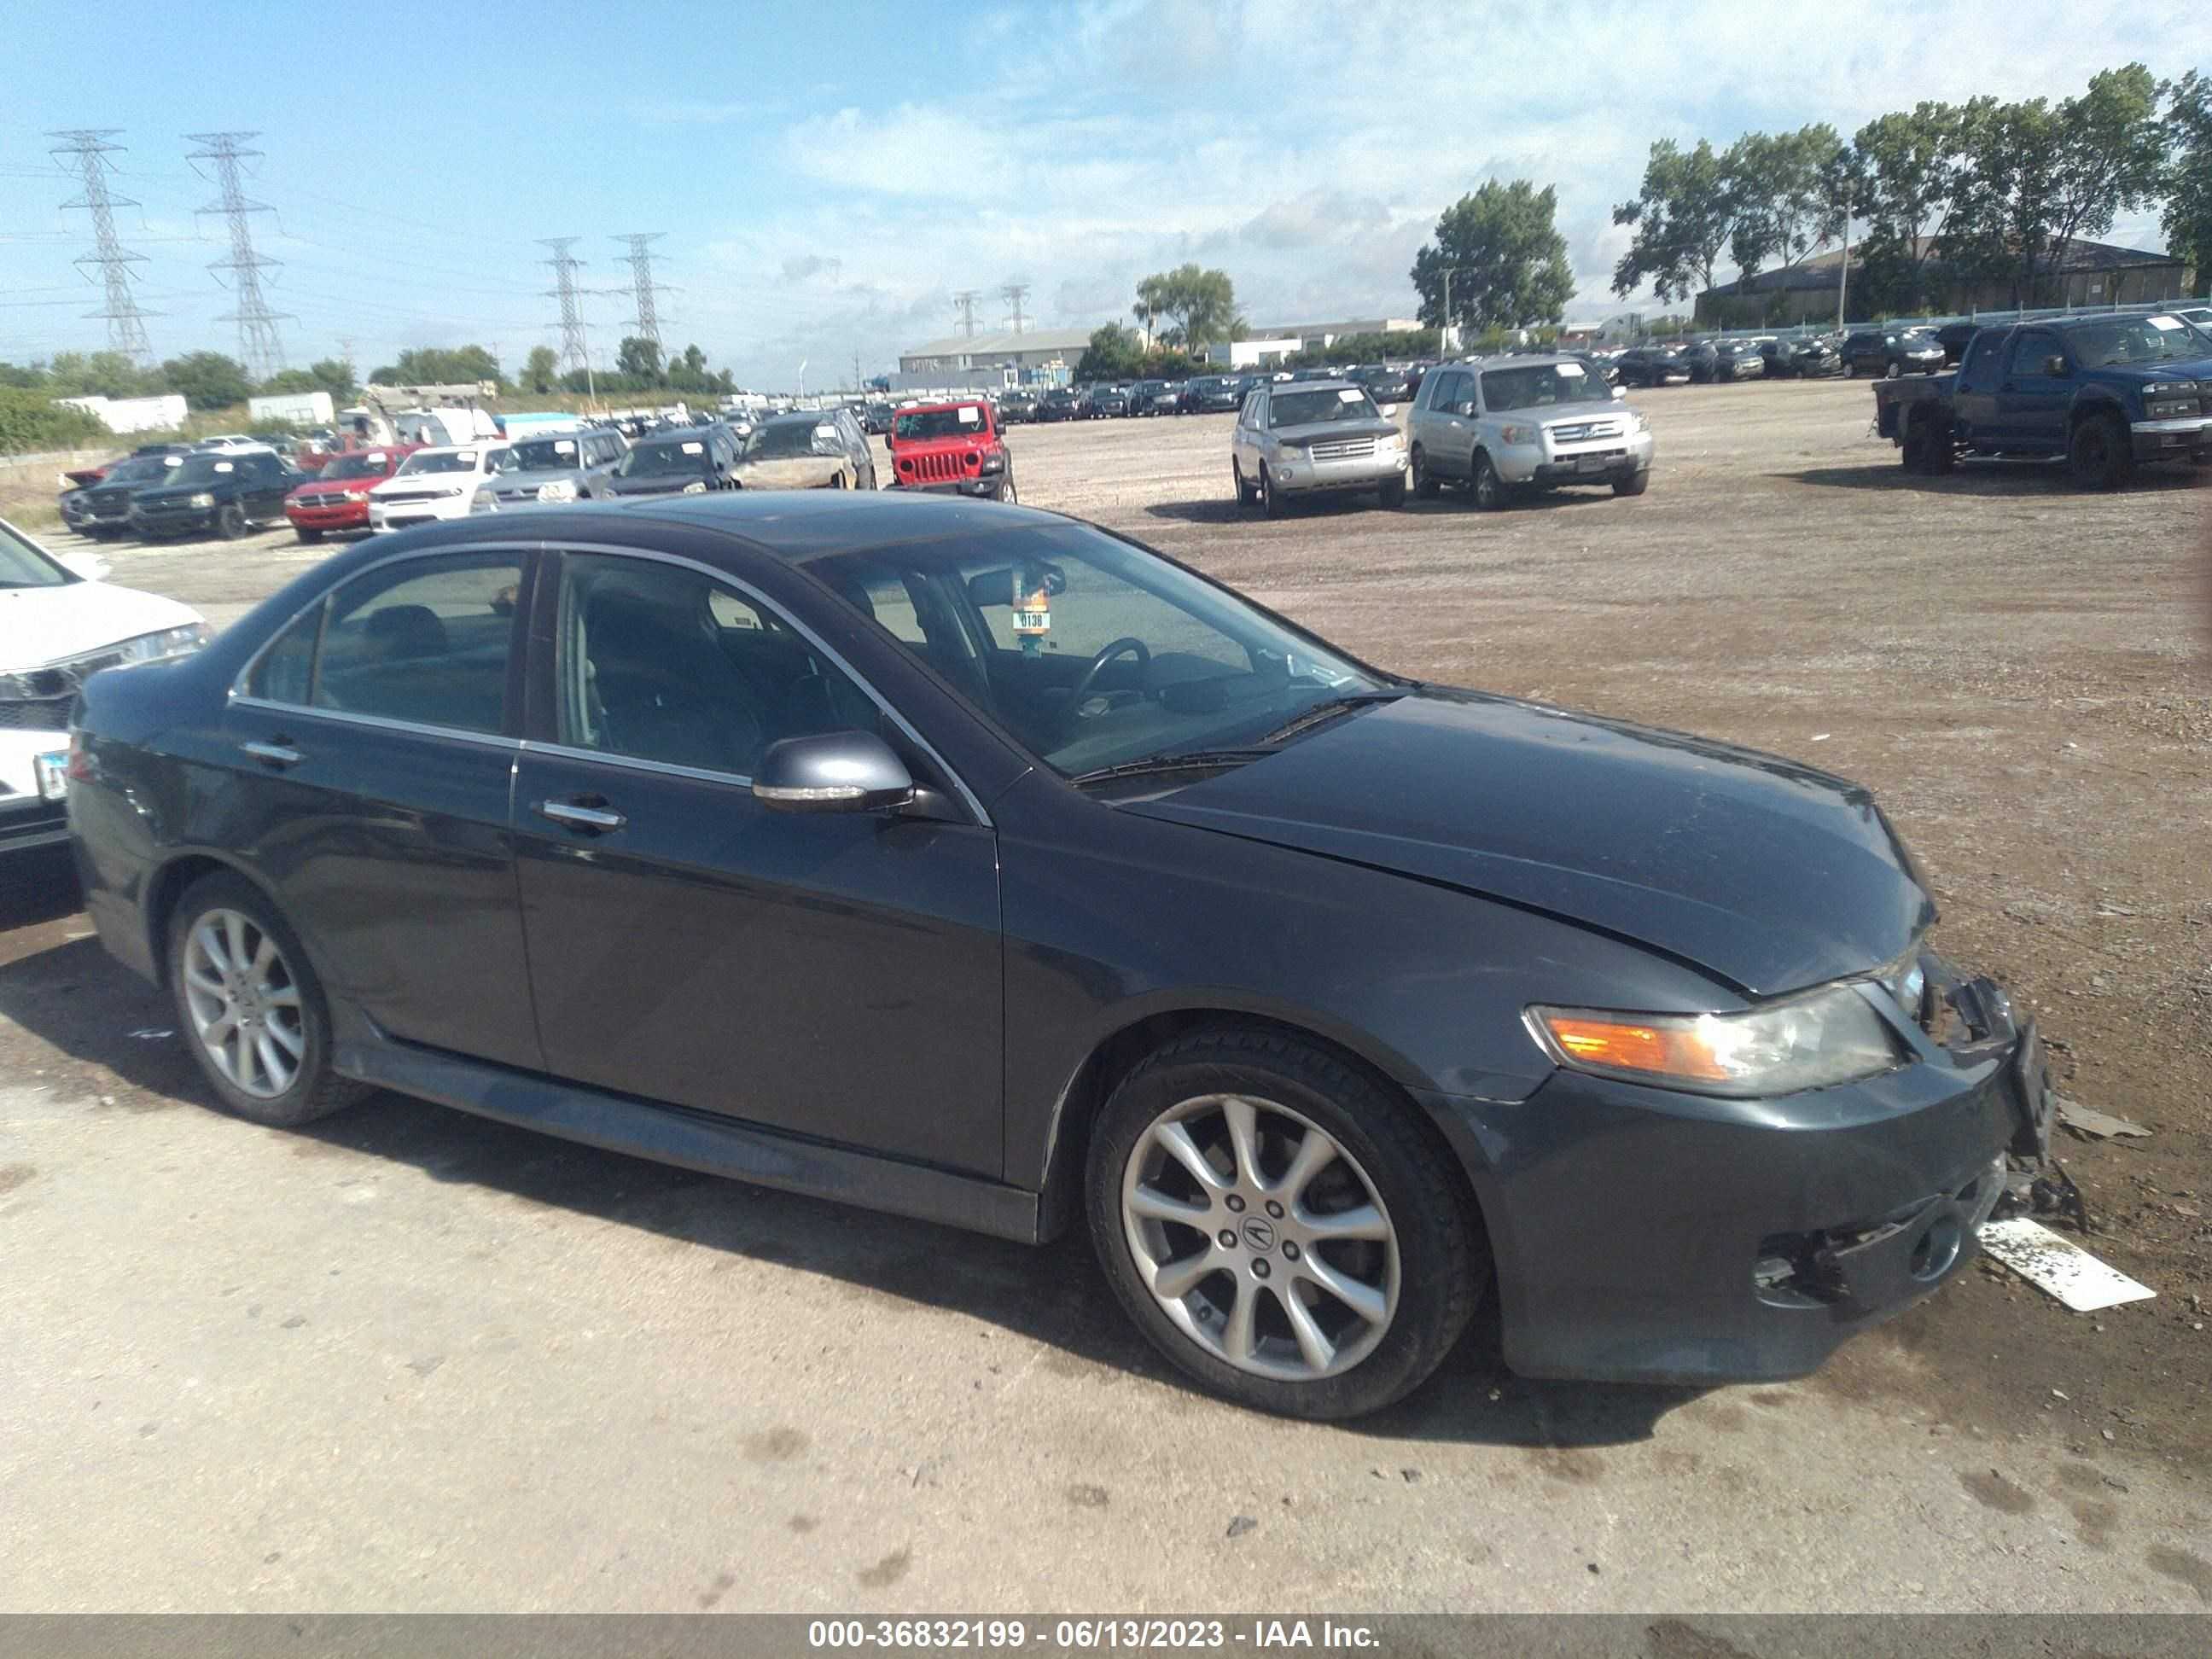 acura tsx 2007 jh4cl96907c010209